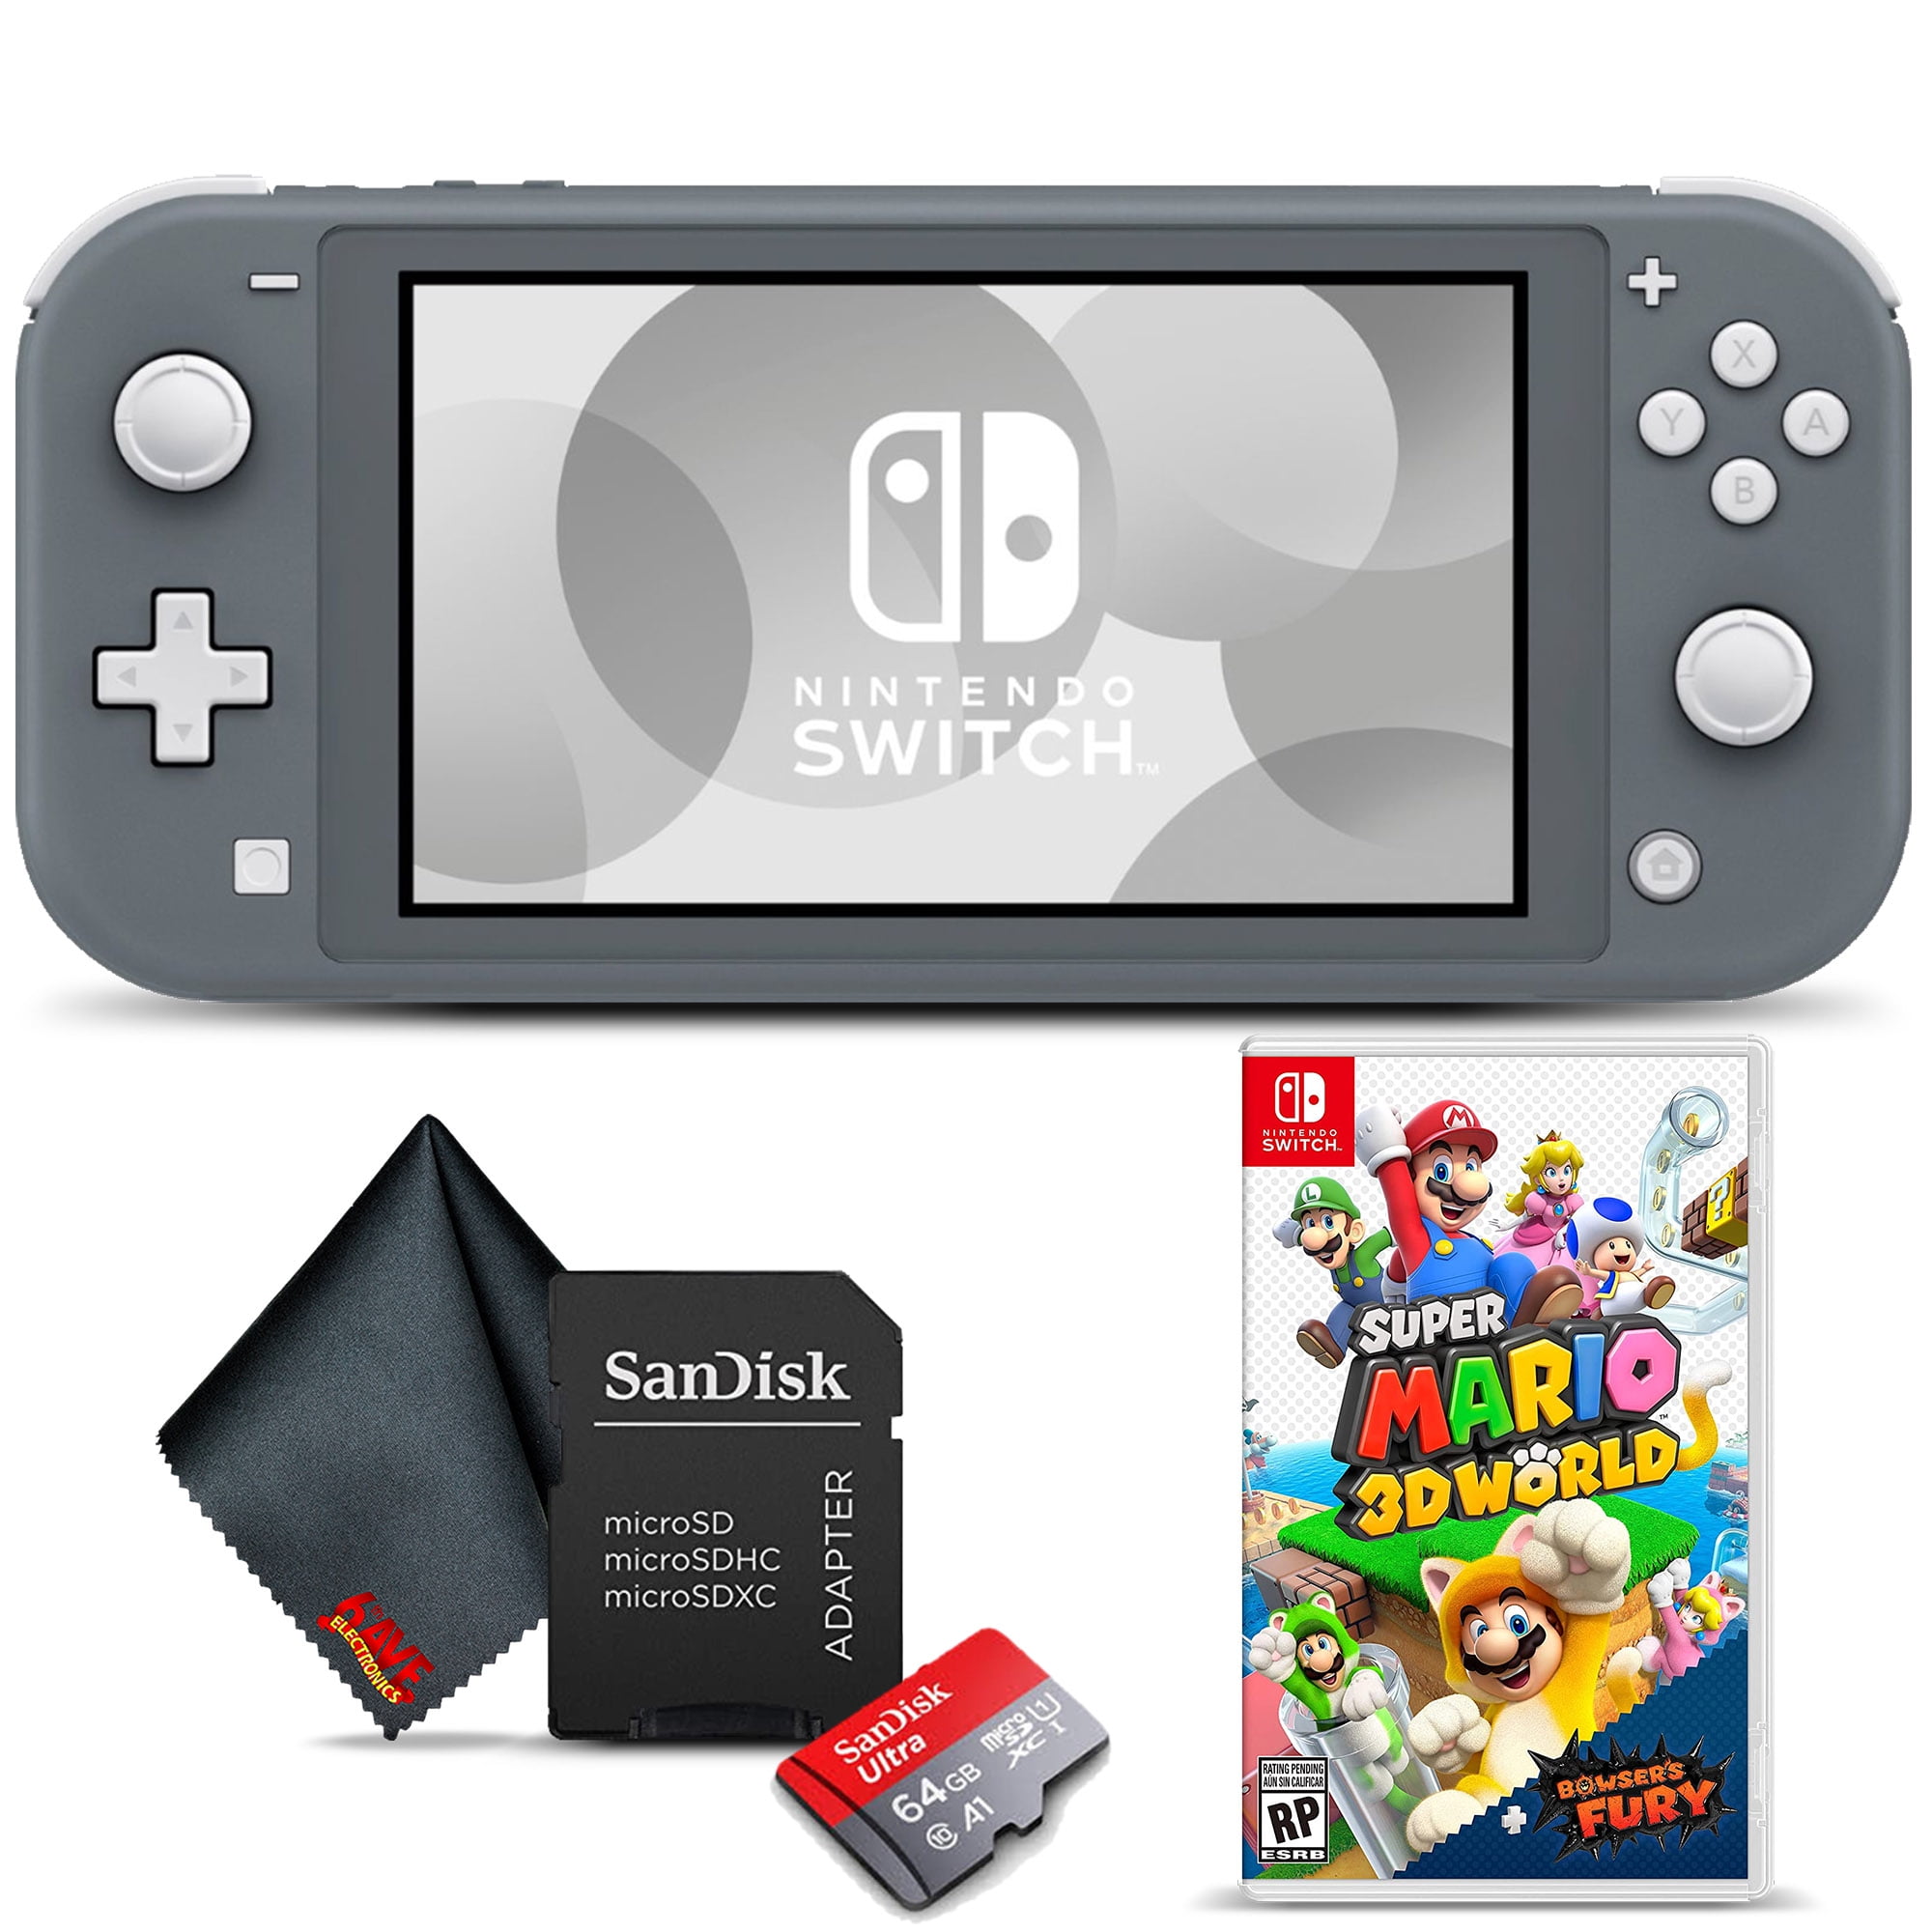 Nintendo Switch Lite (Gray) with Super Mario 3D World + Bowser's Fury Game